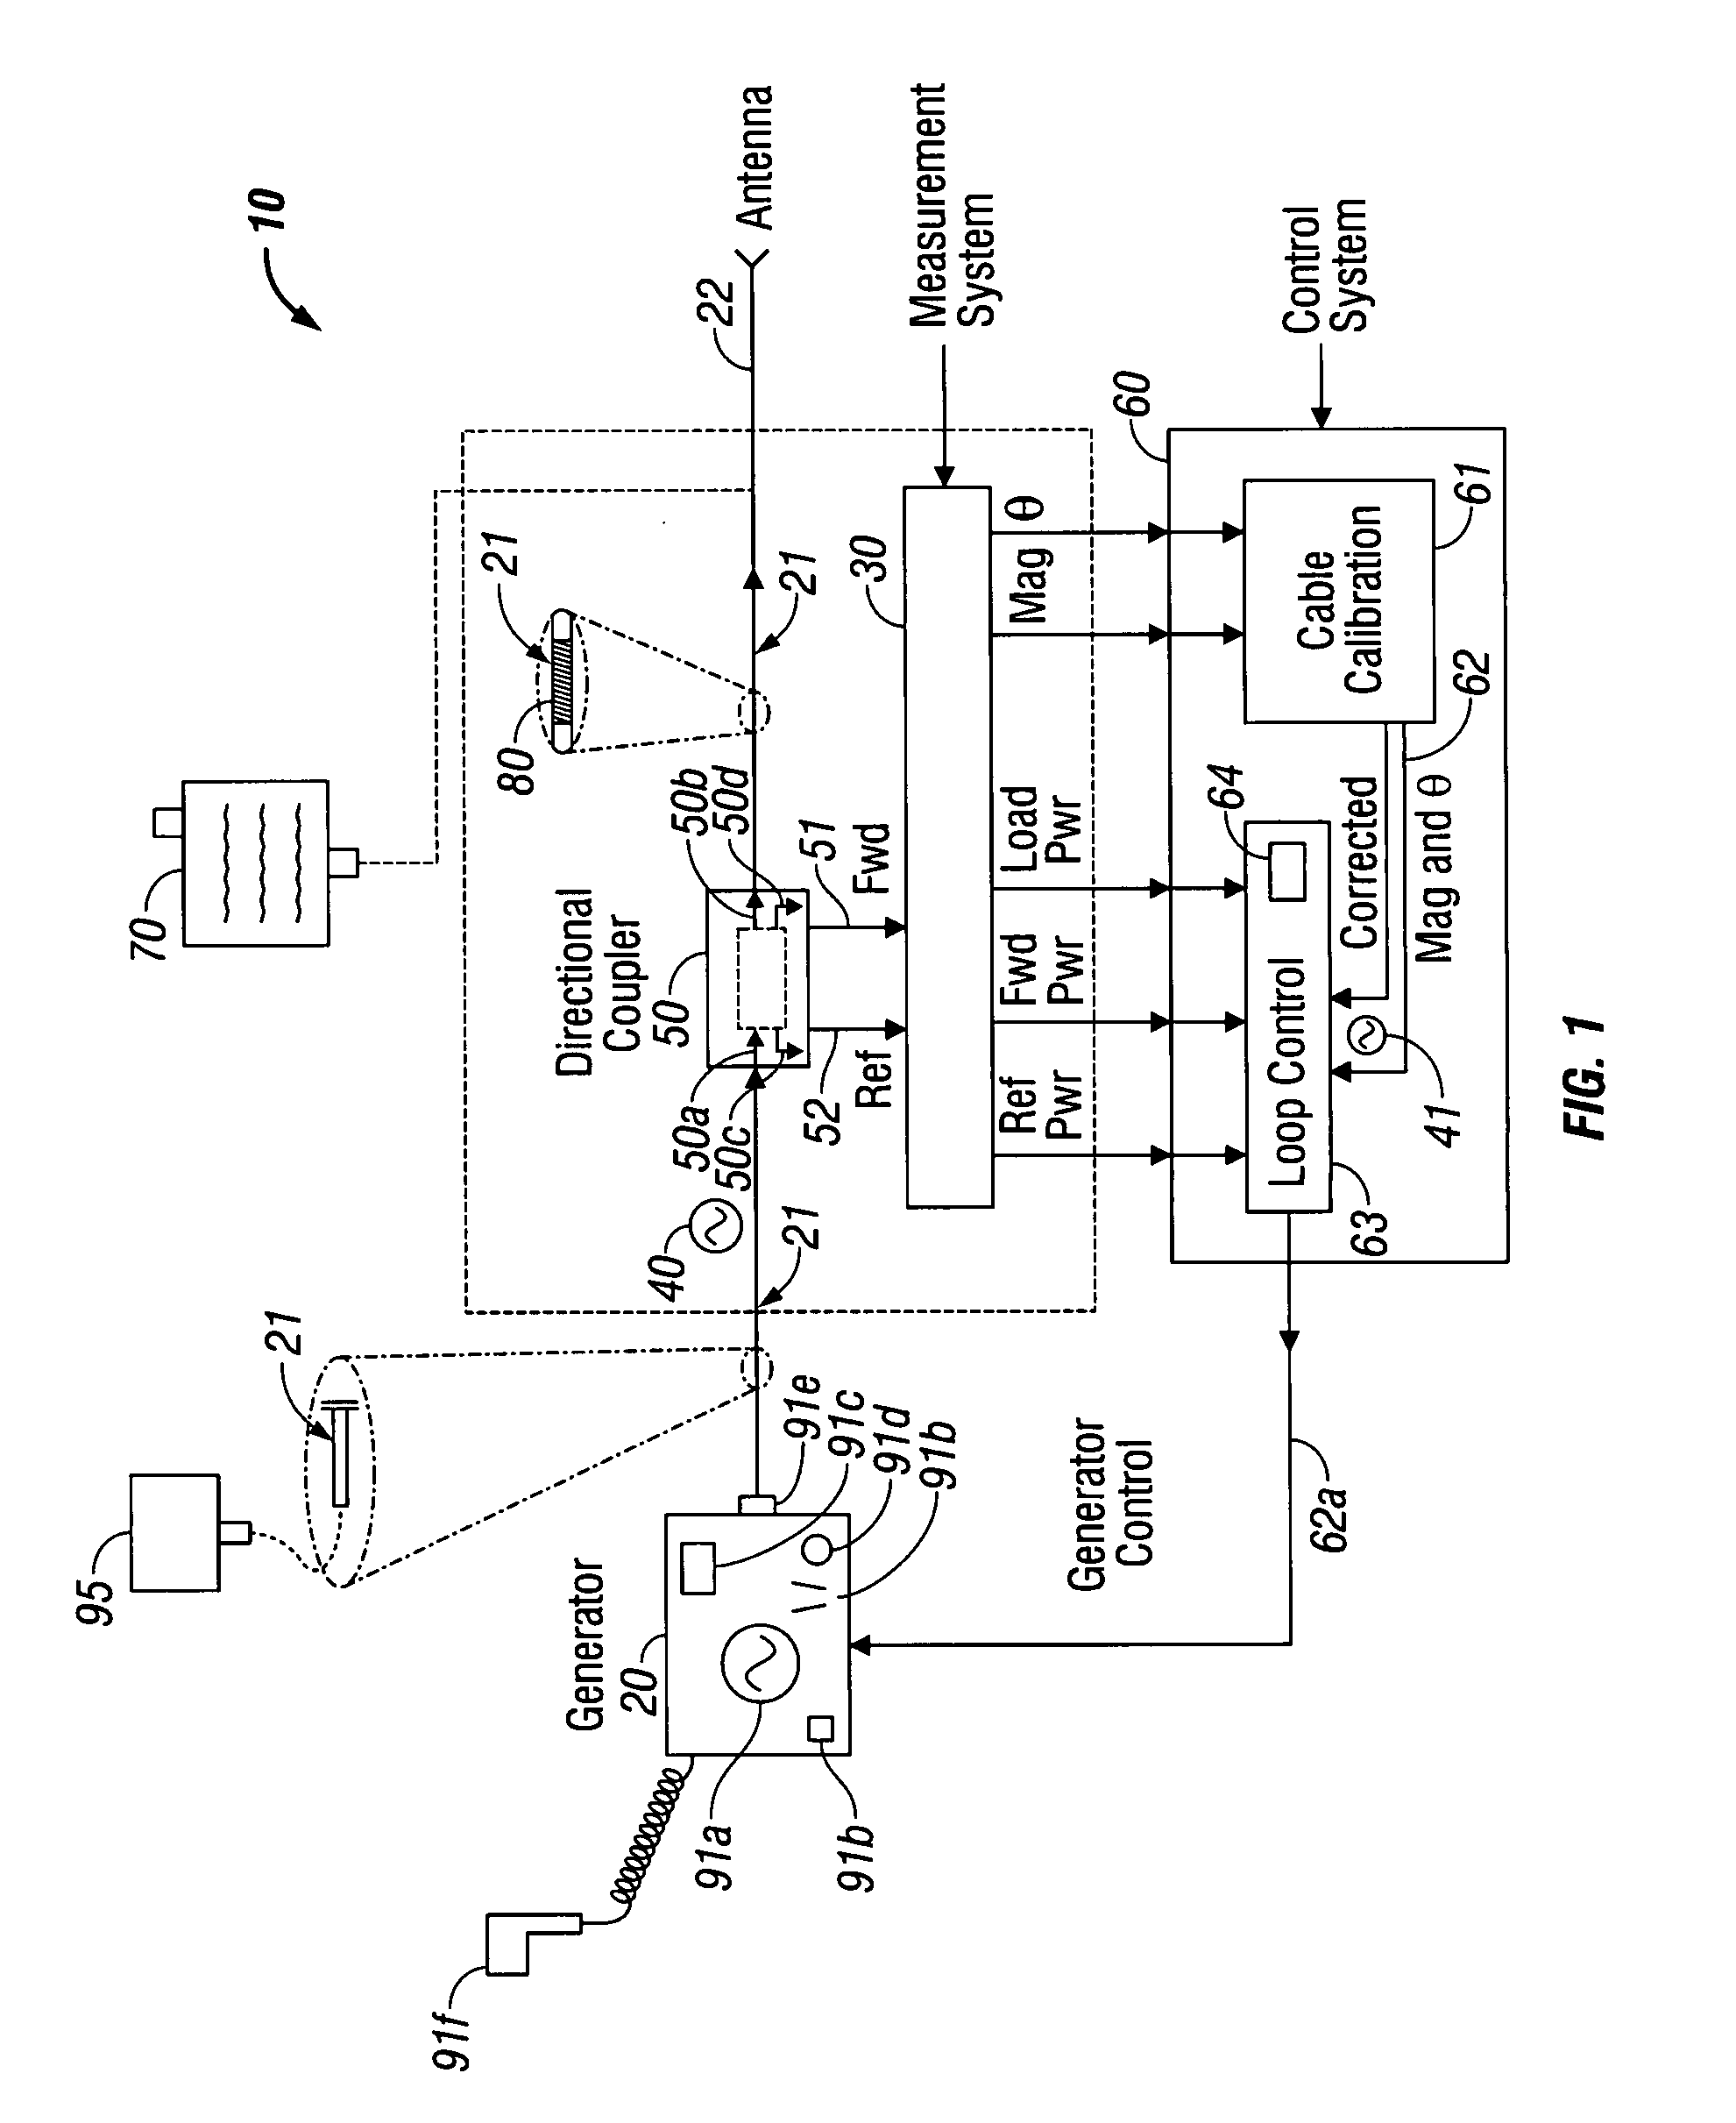 Measurement and control systems and methods for electrosurgical procedures